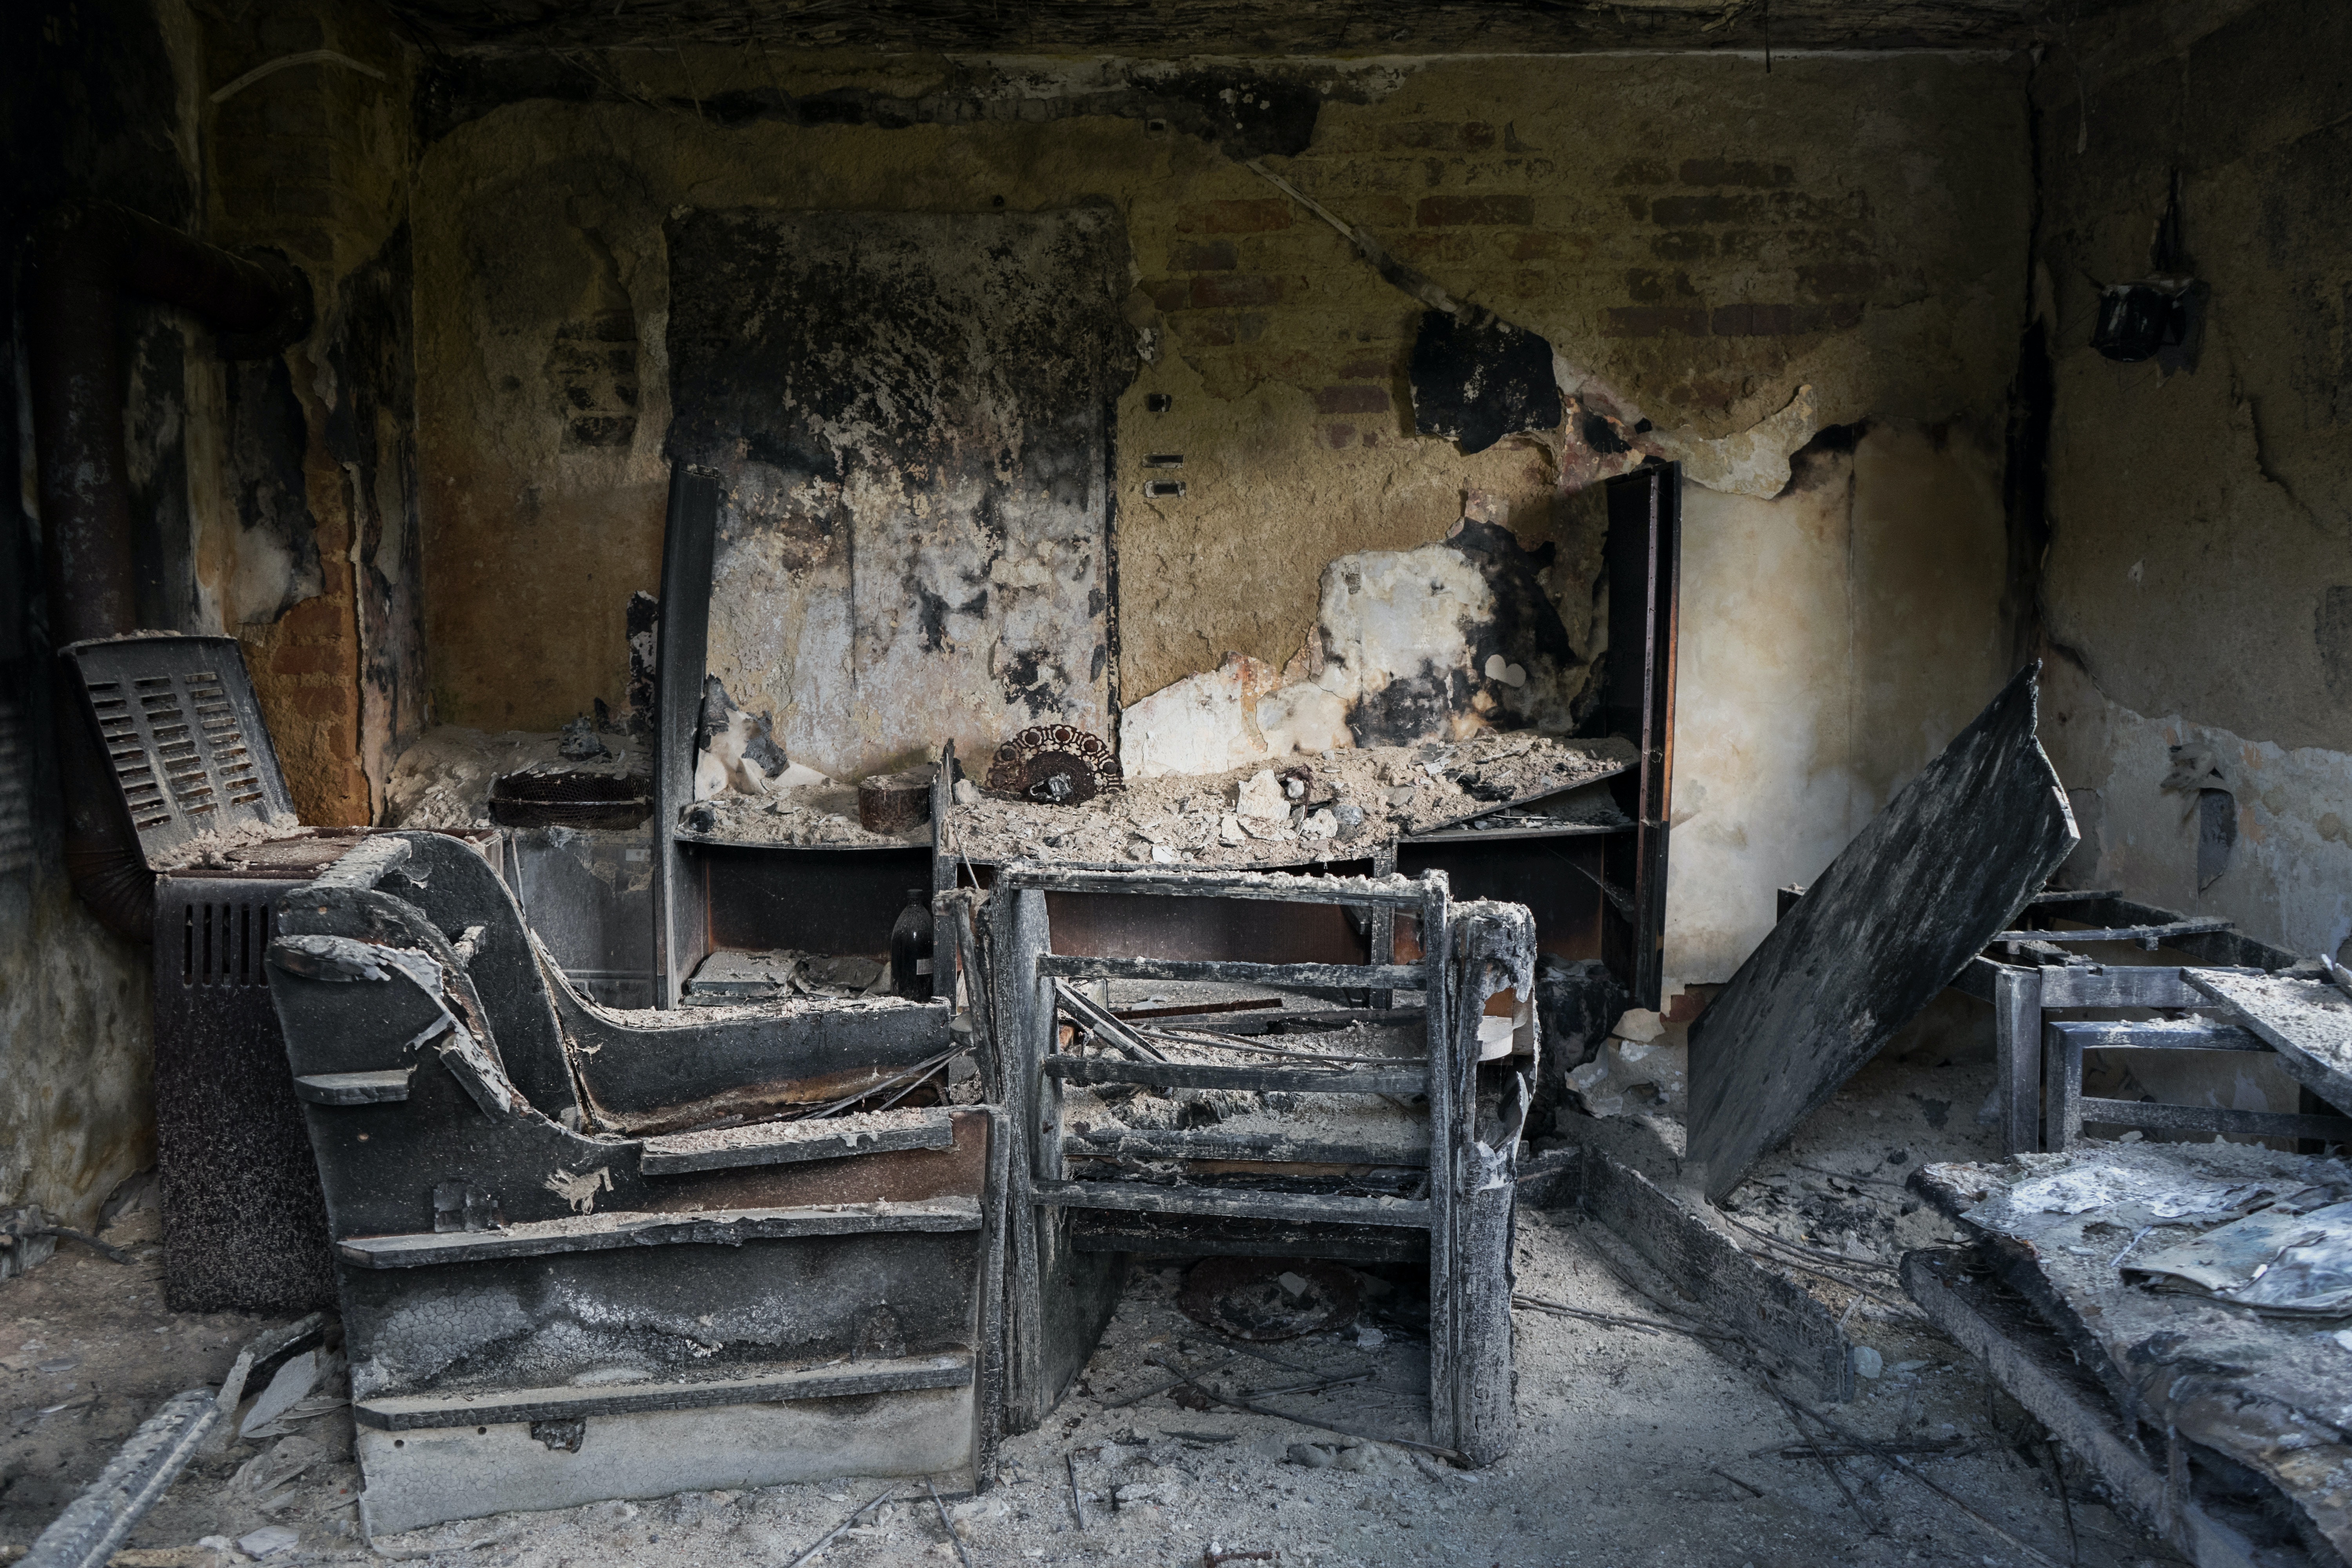 Their family house burned down. | Source: Pexels